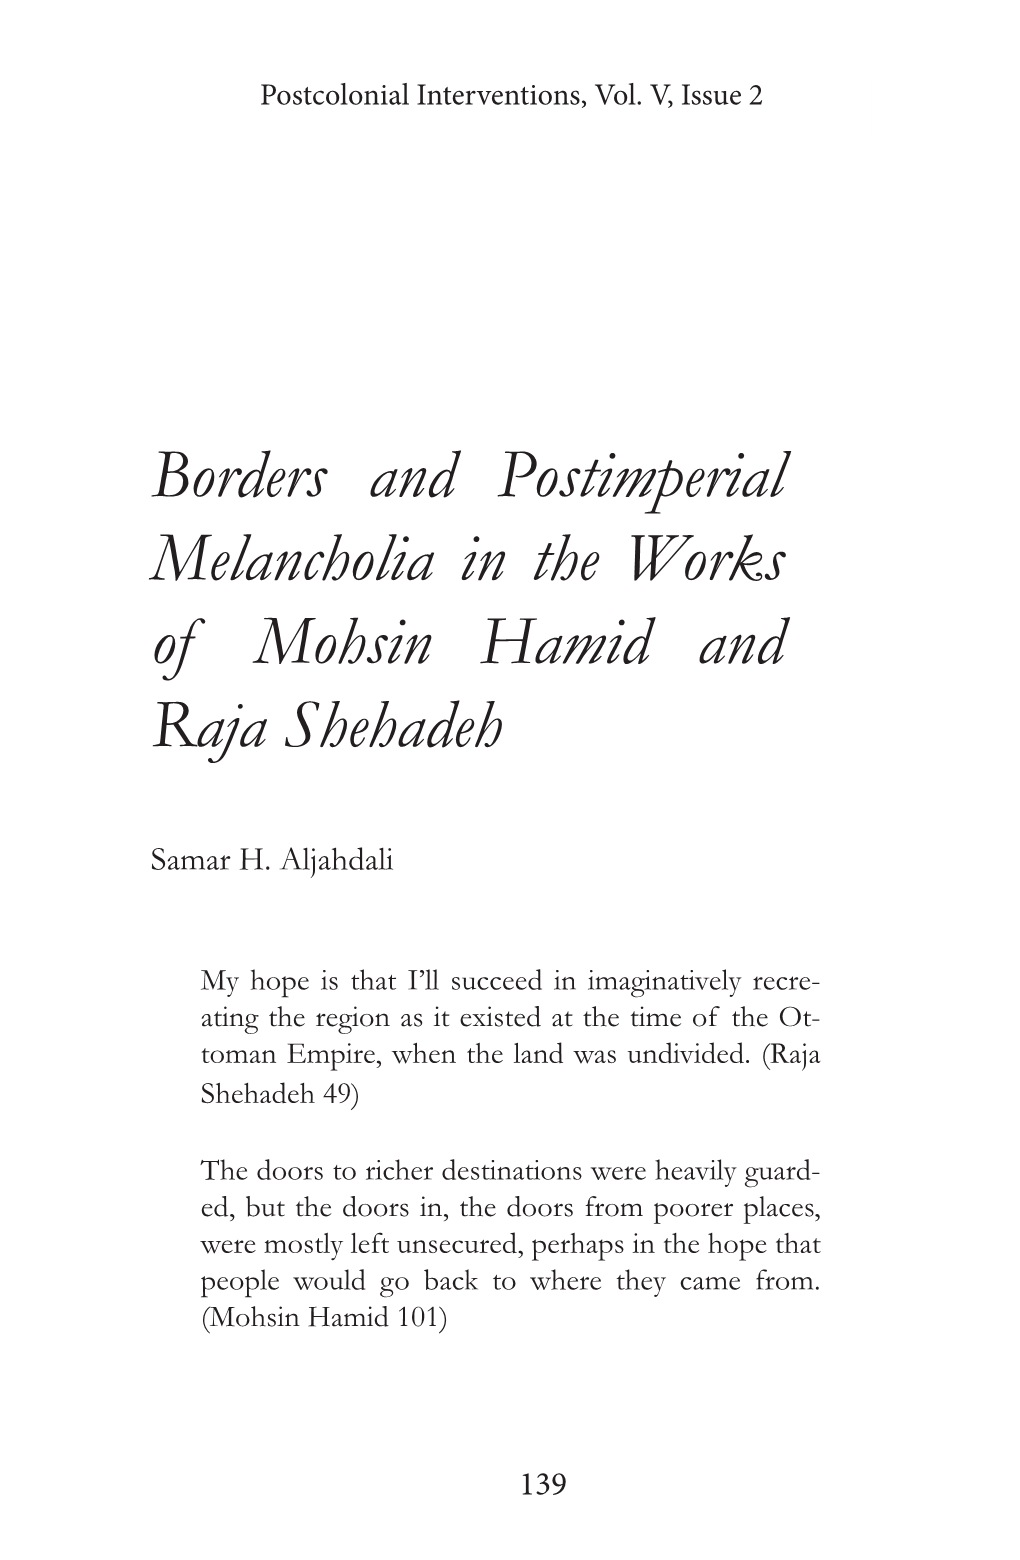 Borders and Postimperial Melancholia in the Works of Mohsin Hamid and Raja Shehadeh